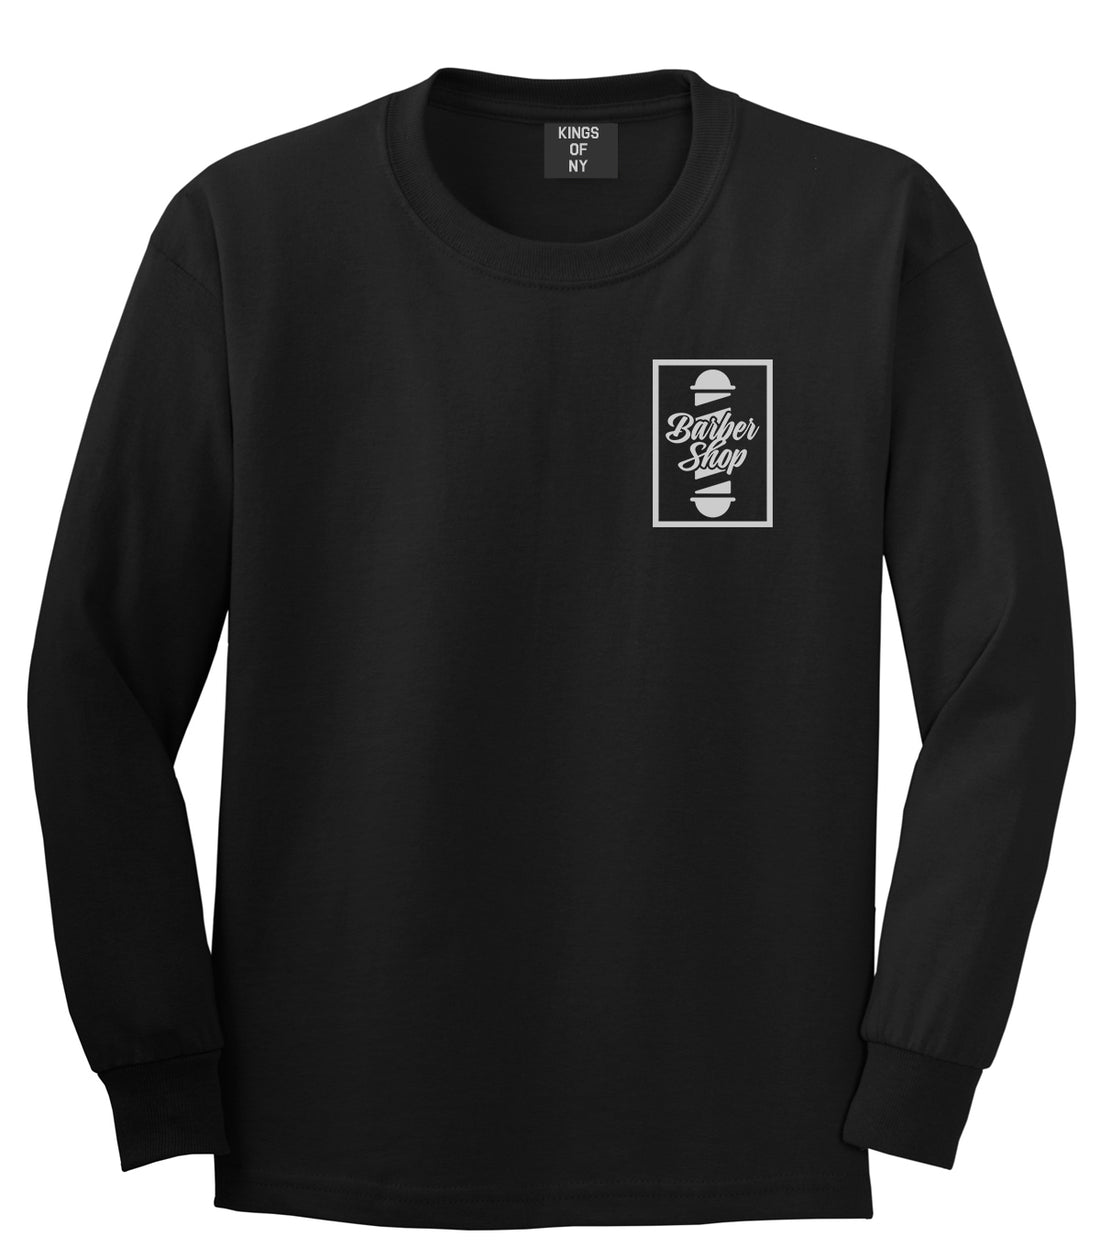 Barbershop Pole Chest Black Long Sleeve T-Shirt by Kings Of NY